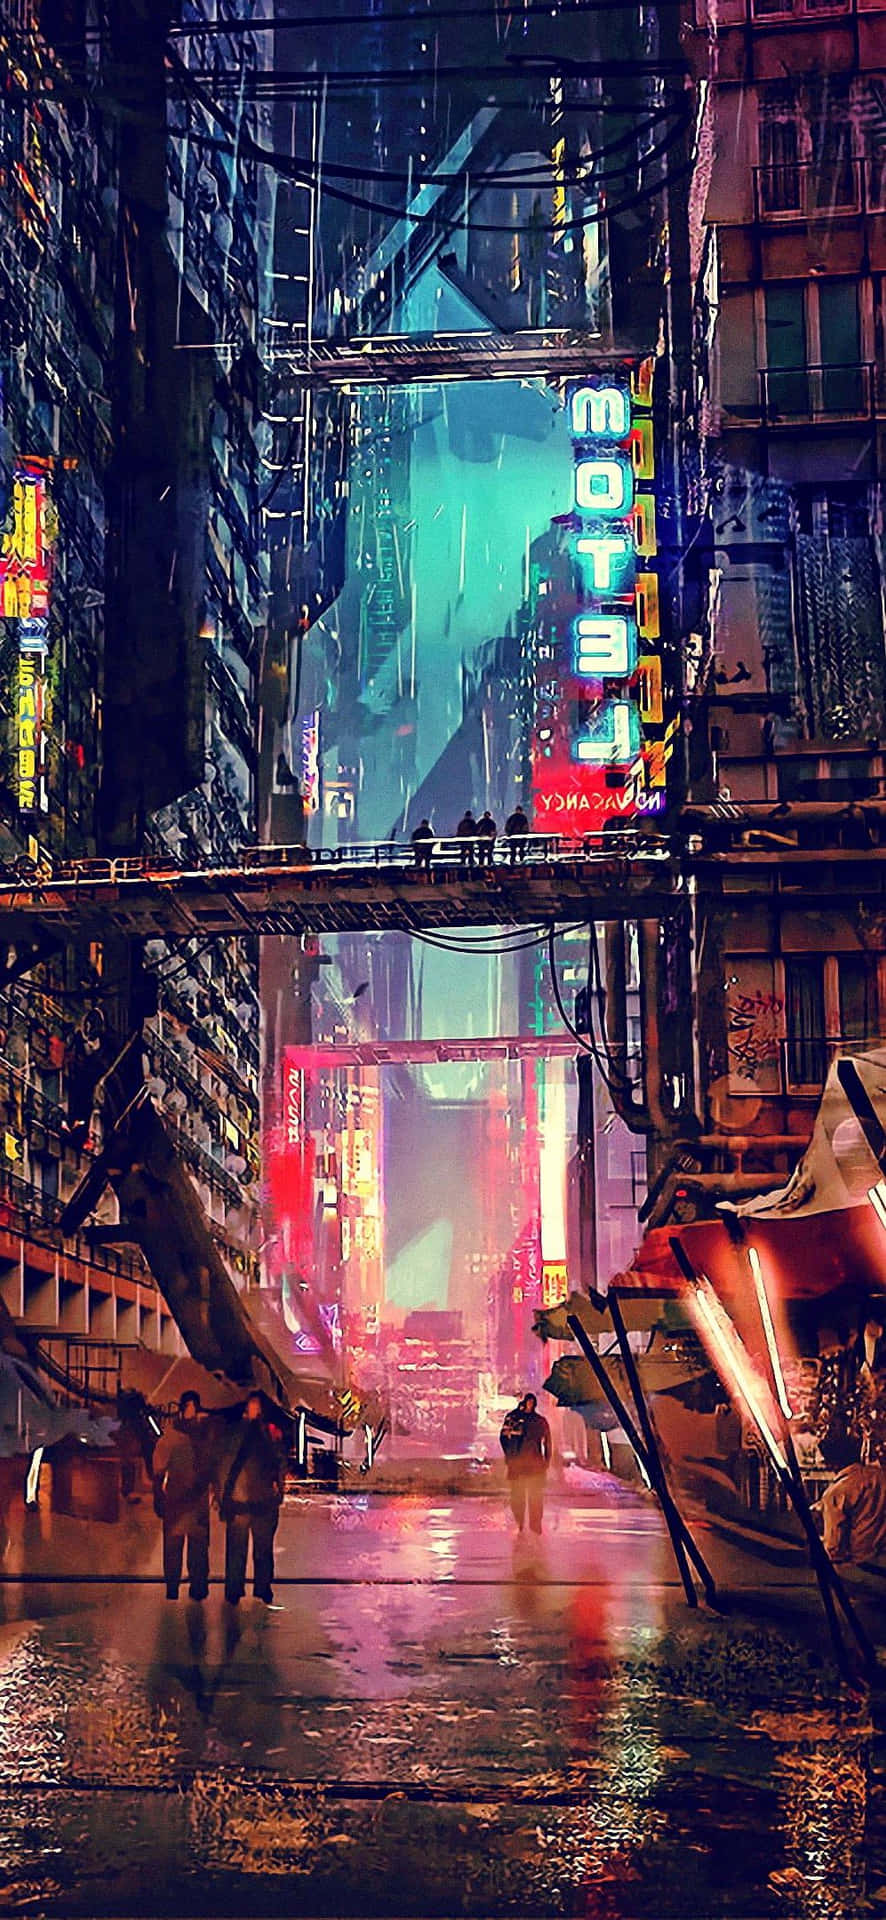 Welcome to Cyberpunk City, a city of towering skyscrapers and neon-lit streets.